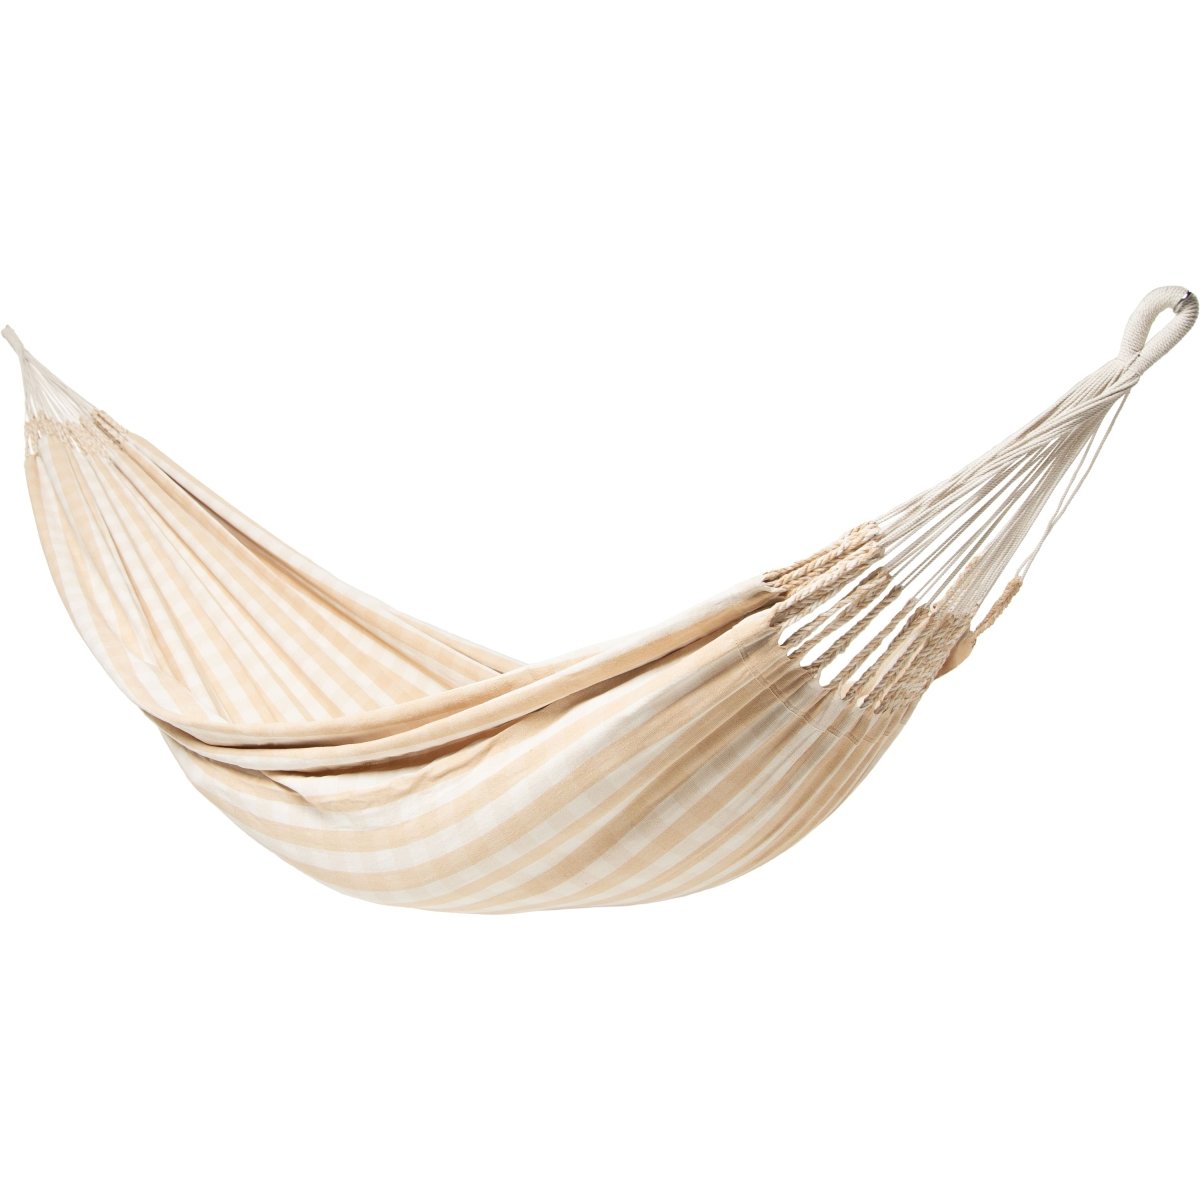 Authentic Double Vichy Hammock in Sand - Outdoorium